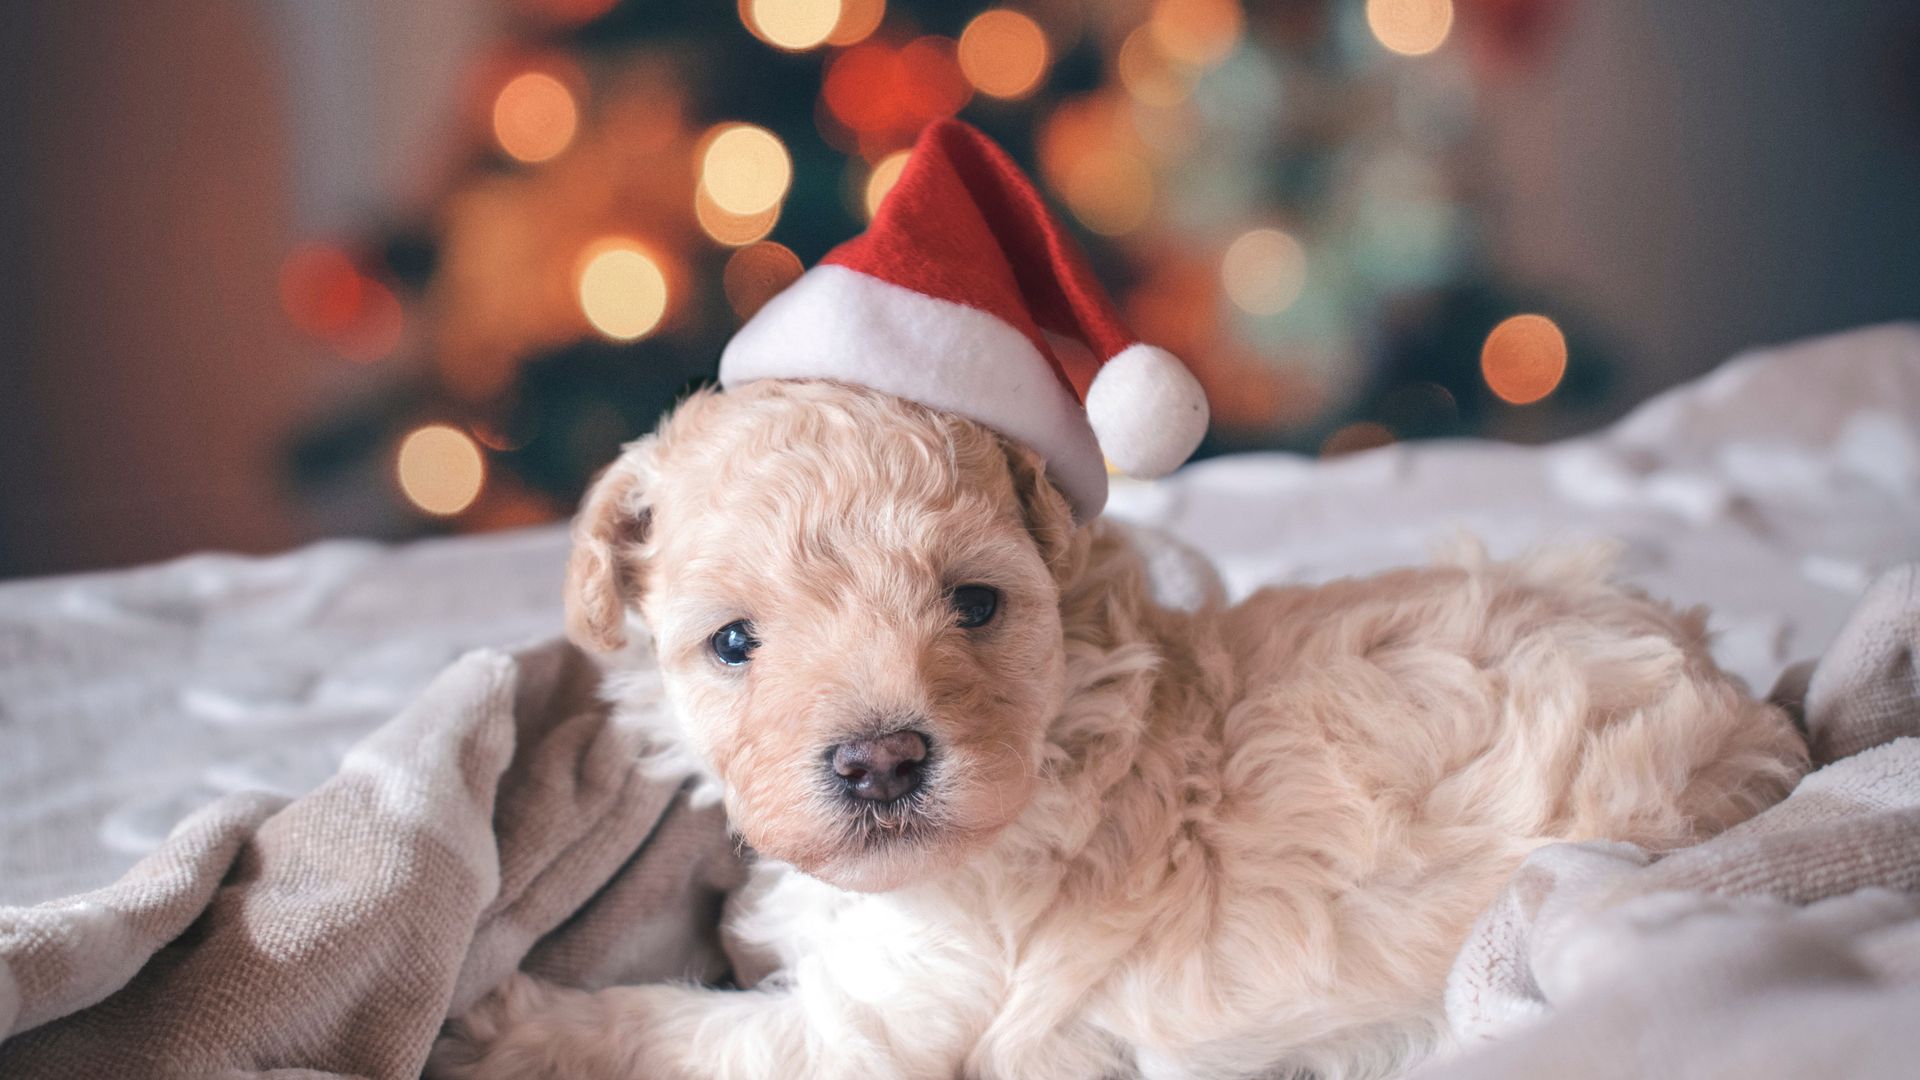 Cute Puppy With Christmas Hat Free HQ Image